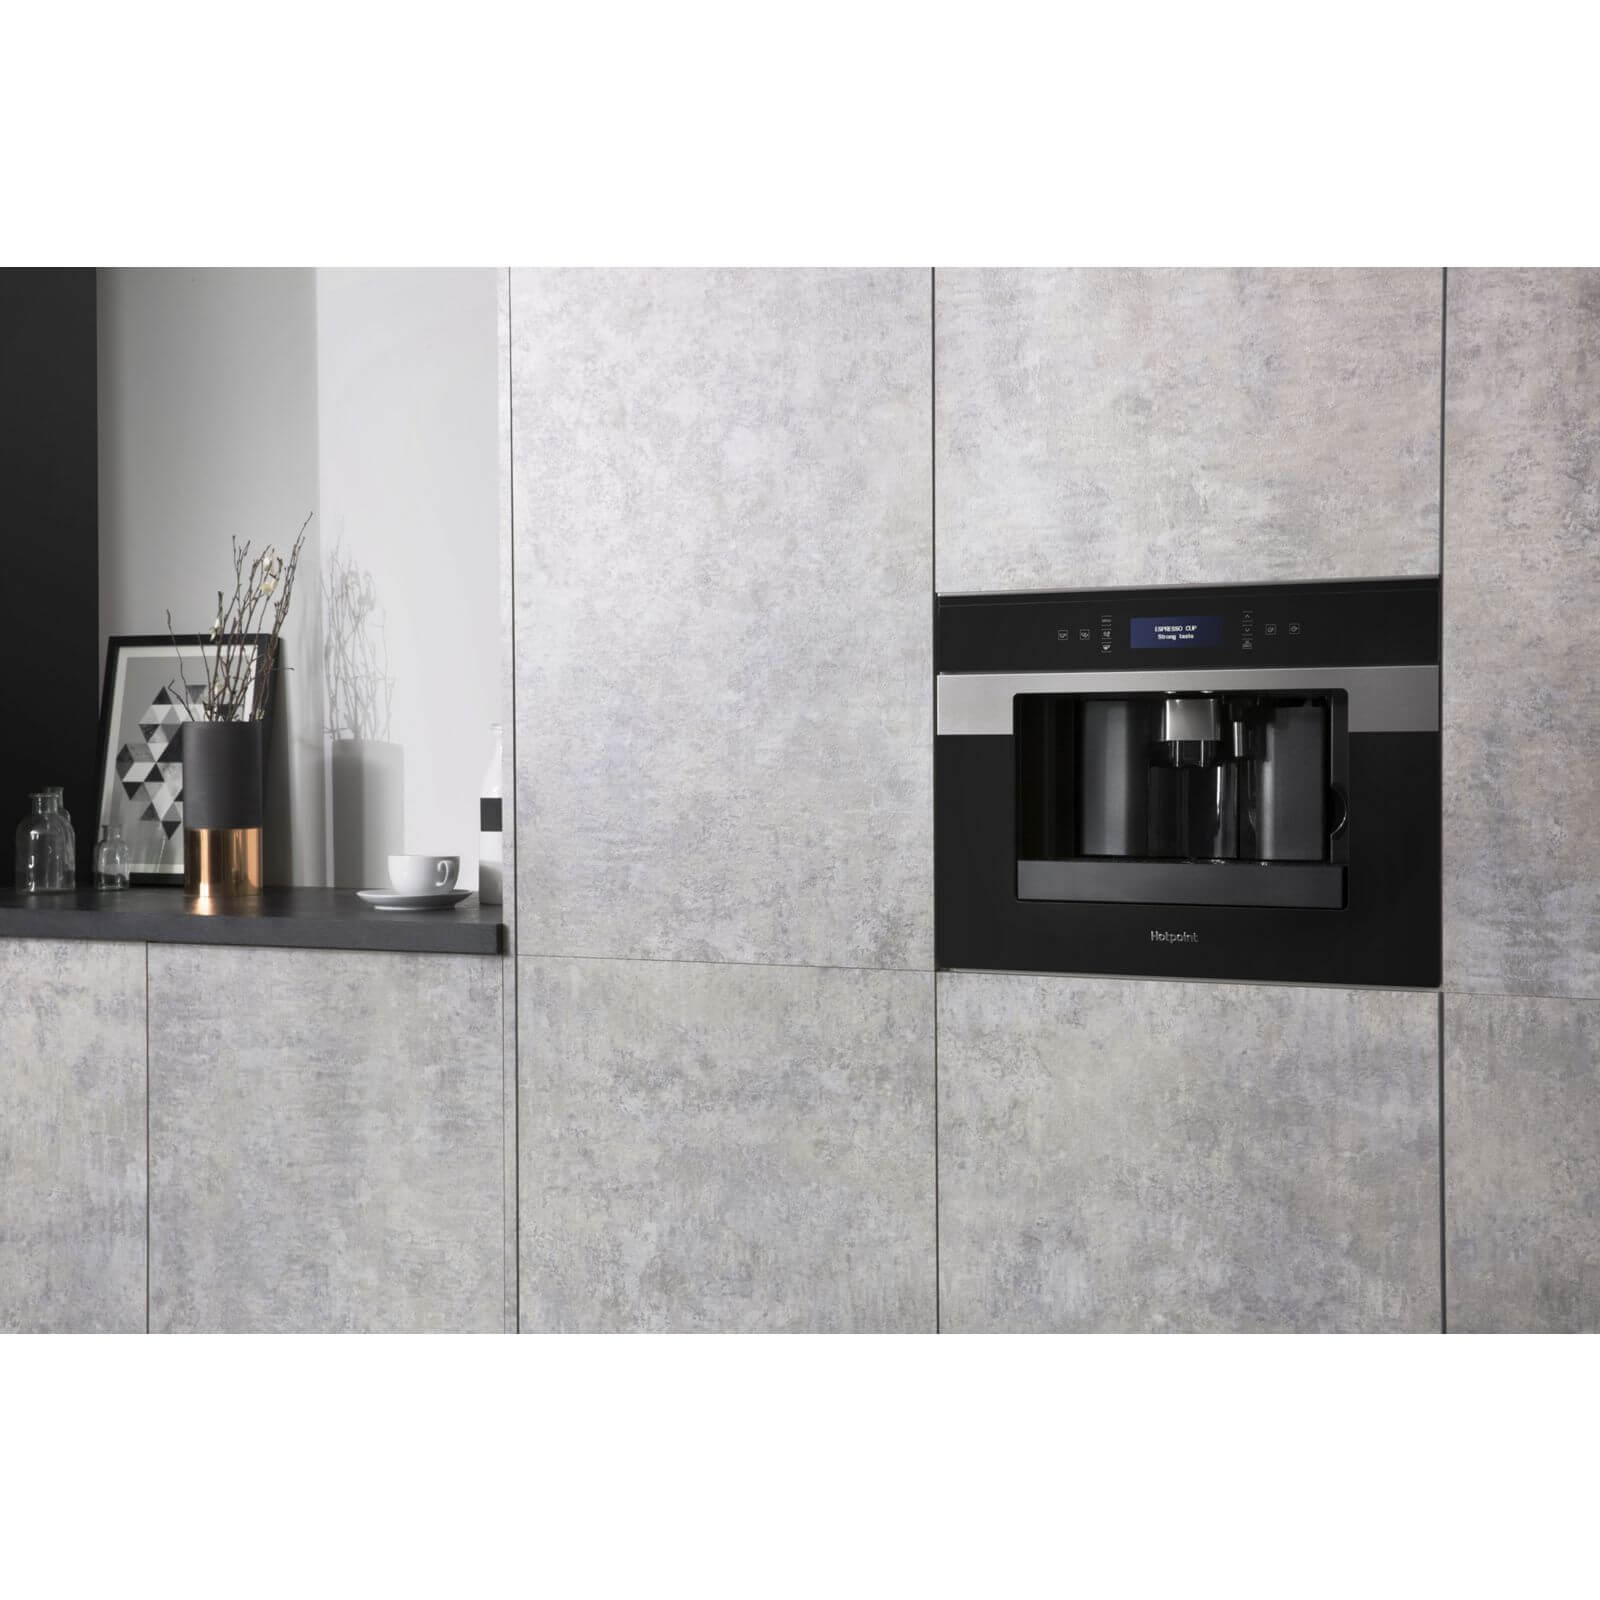 Hotpoint Class 9 CM 9945 H Built-in Coffee Machine - Stainless Steel